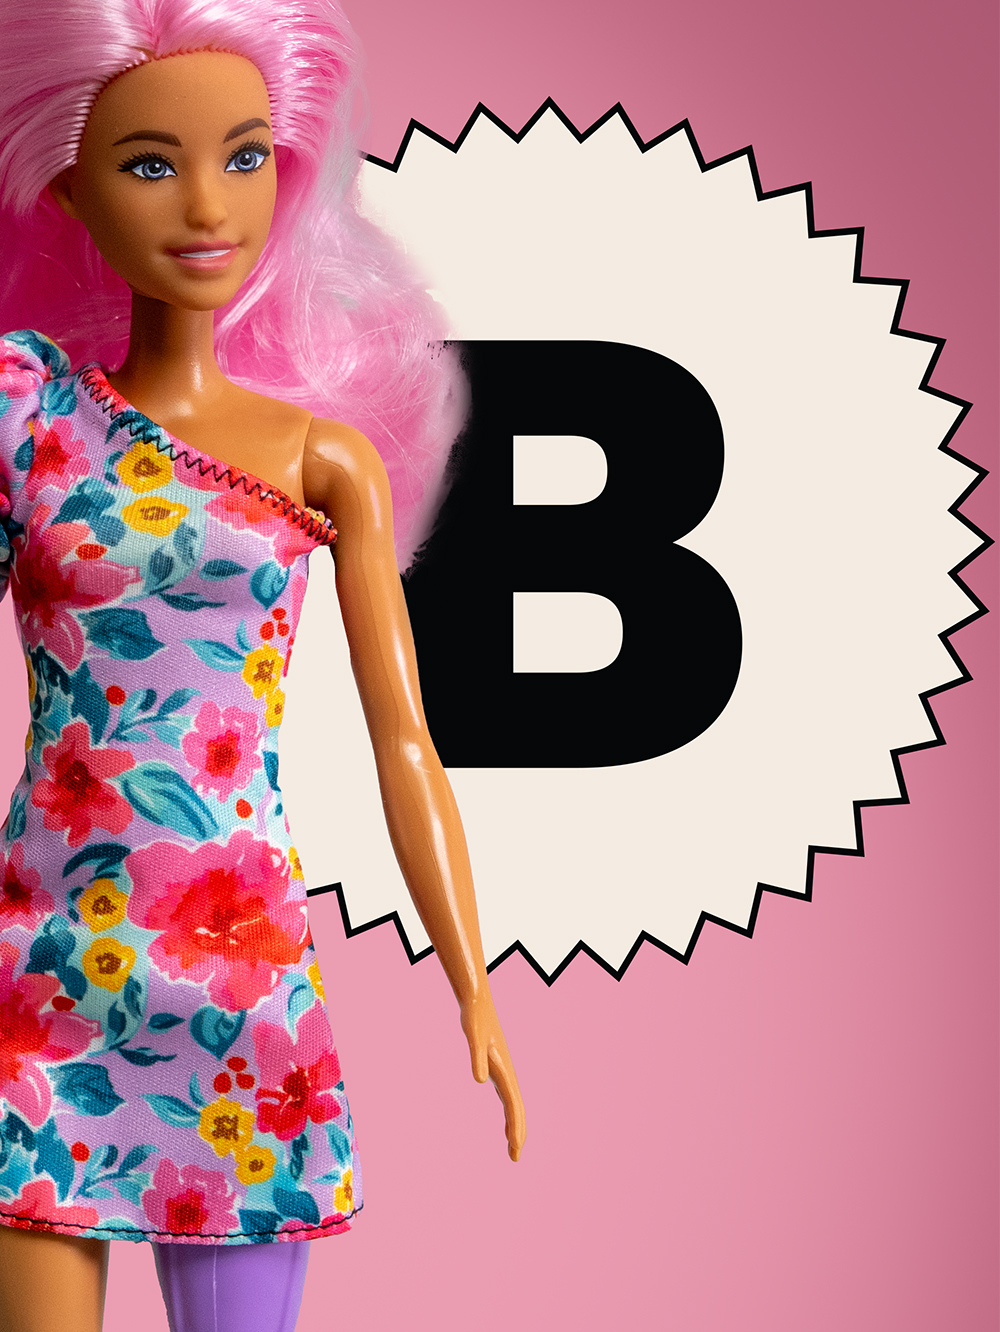 Barbie Fashionistas doll #189, 2019, MoPOP Permanent Collection.